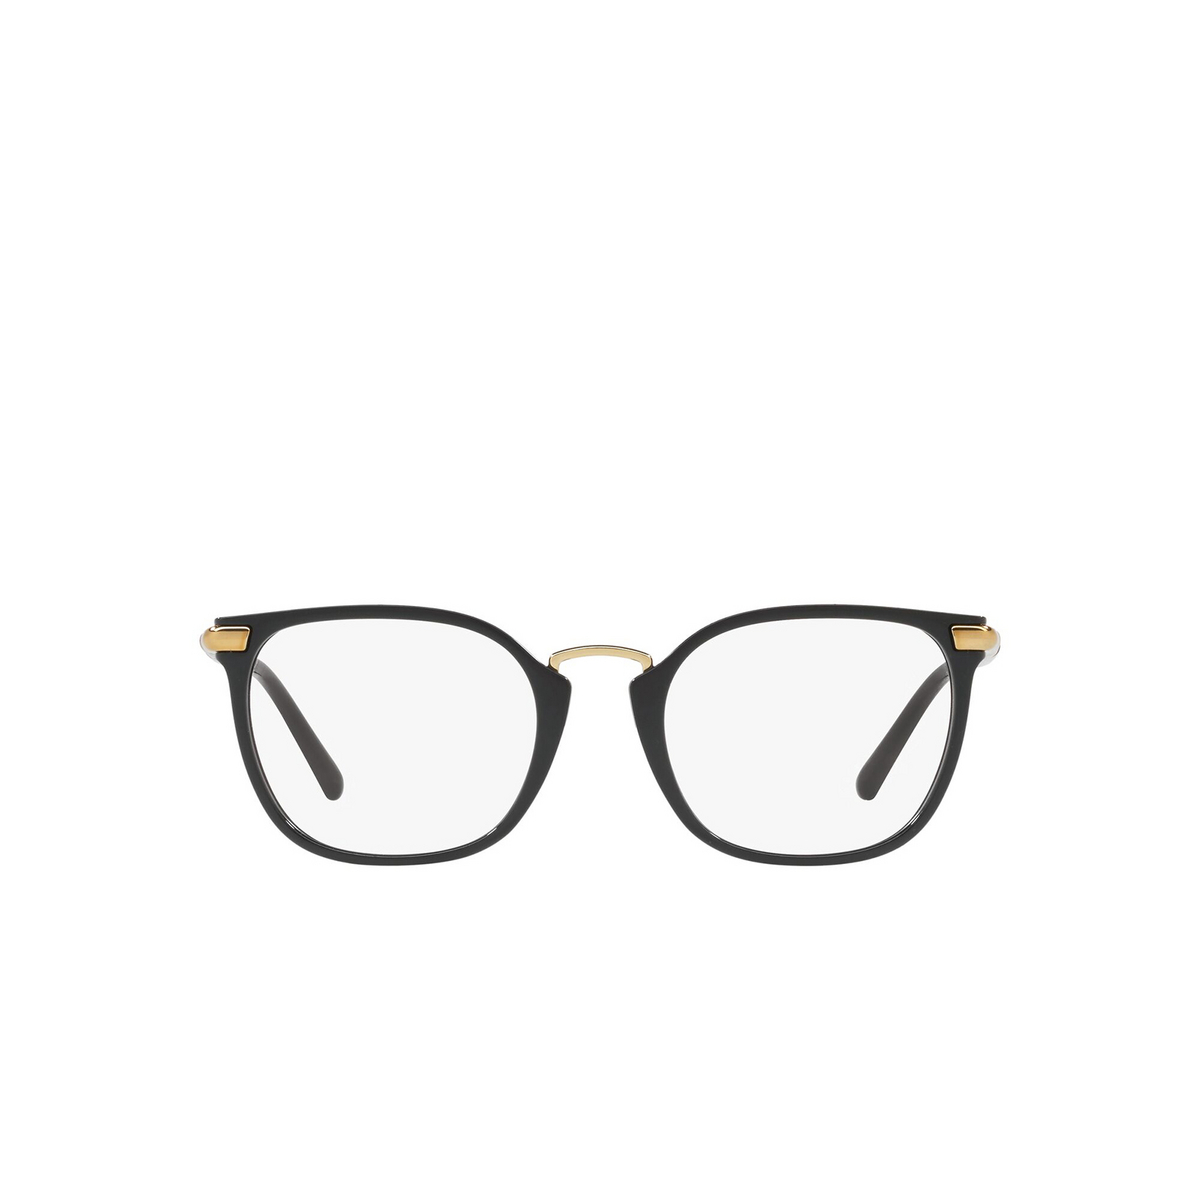 Burberry® Square Eyeglasses: BE2269 color Black 3001 - front view.